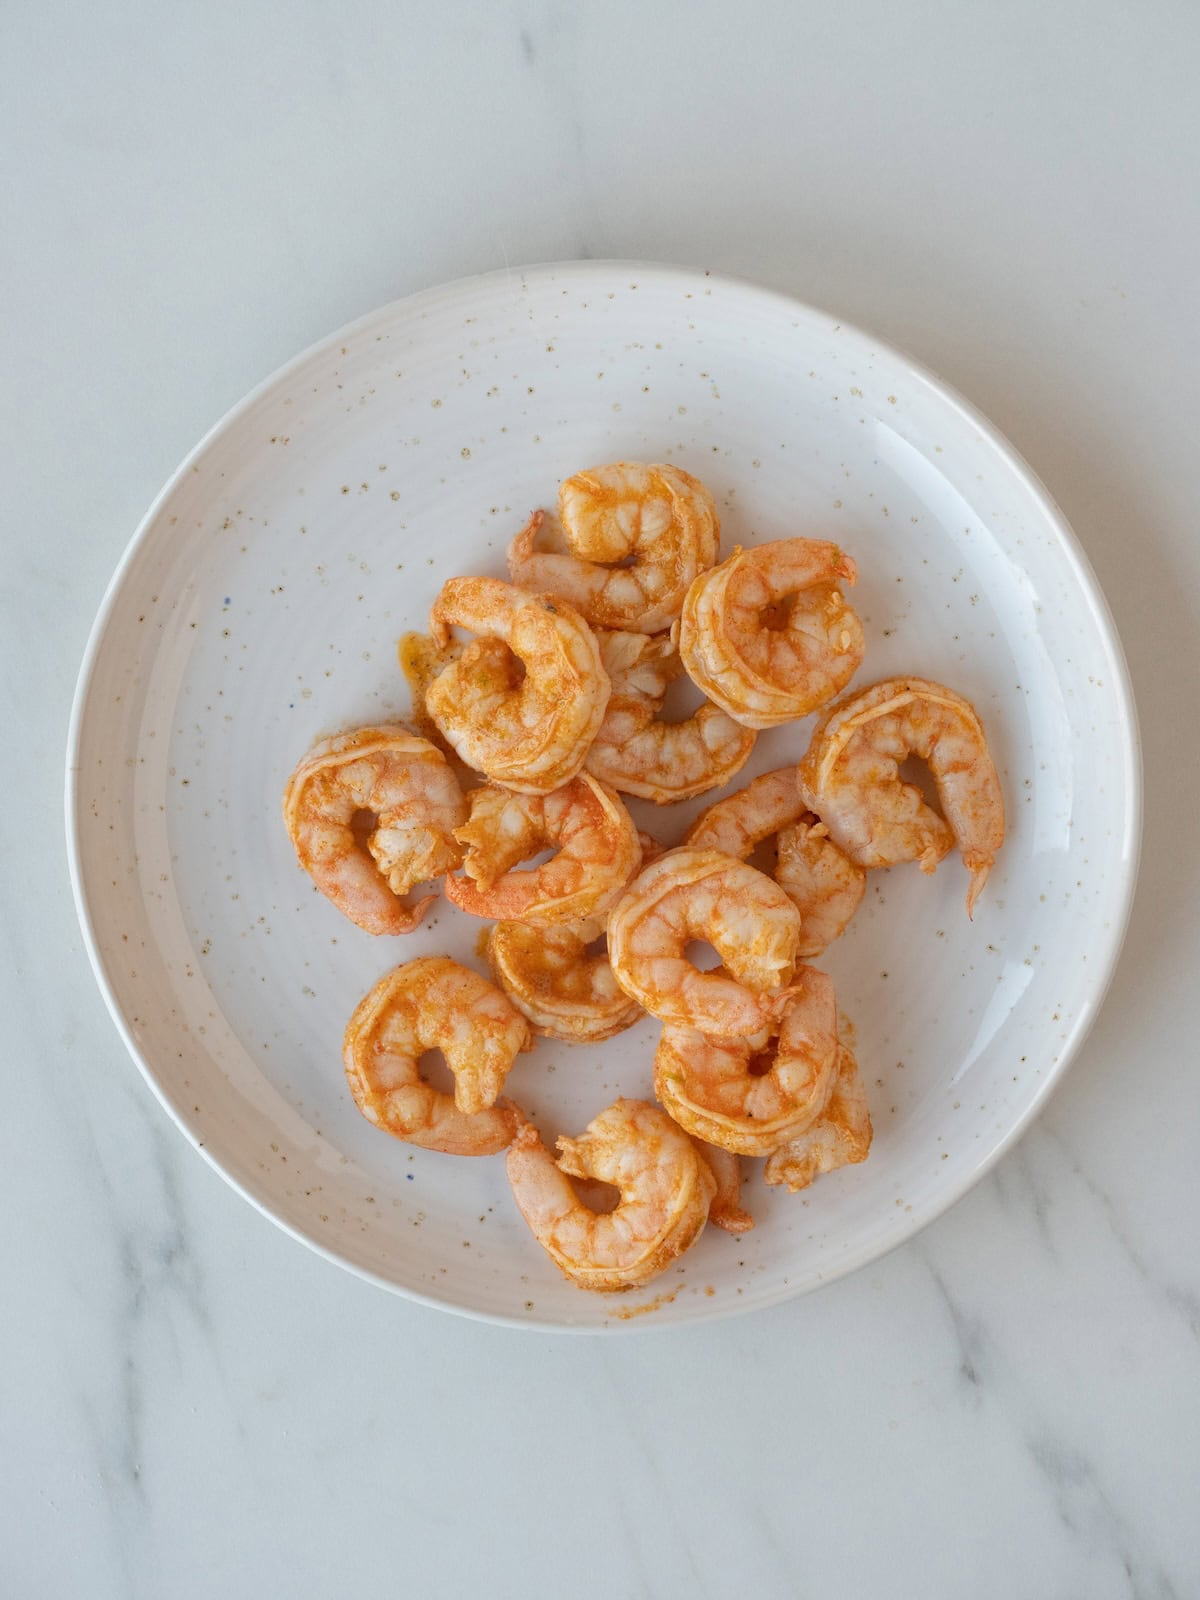 A plate with cooked shrimp.